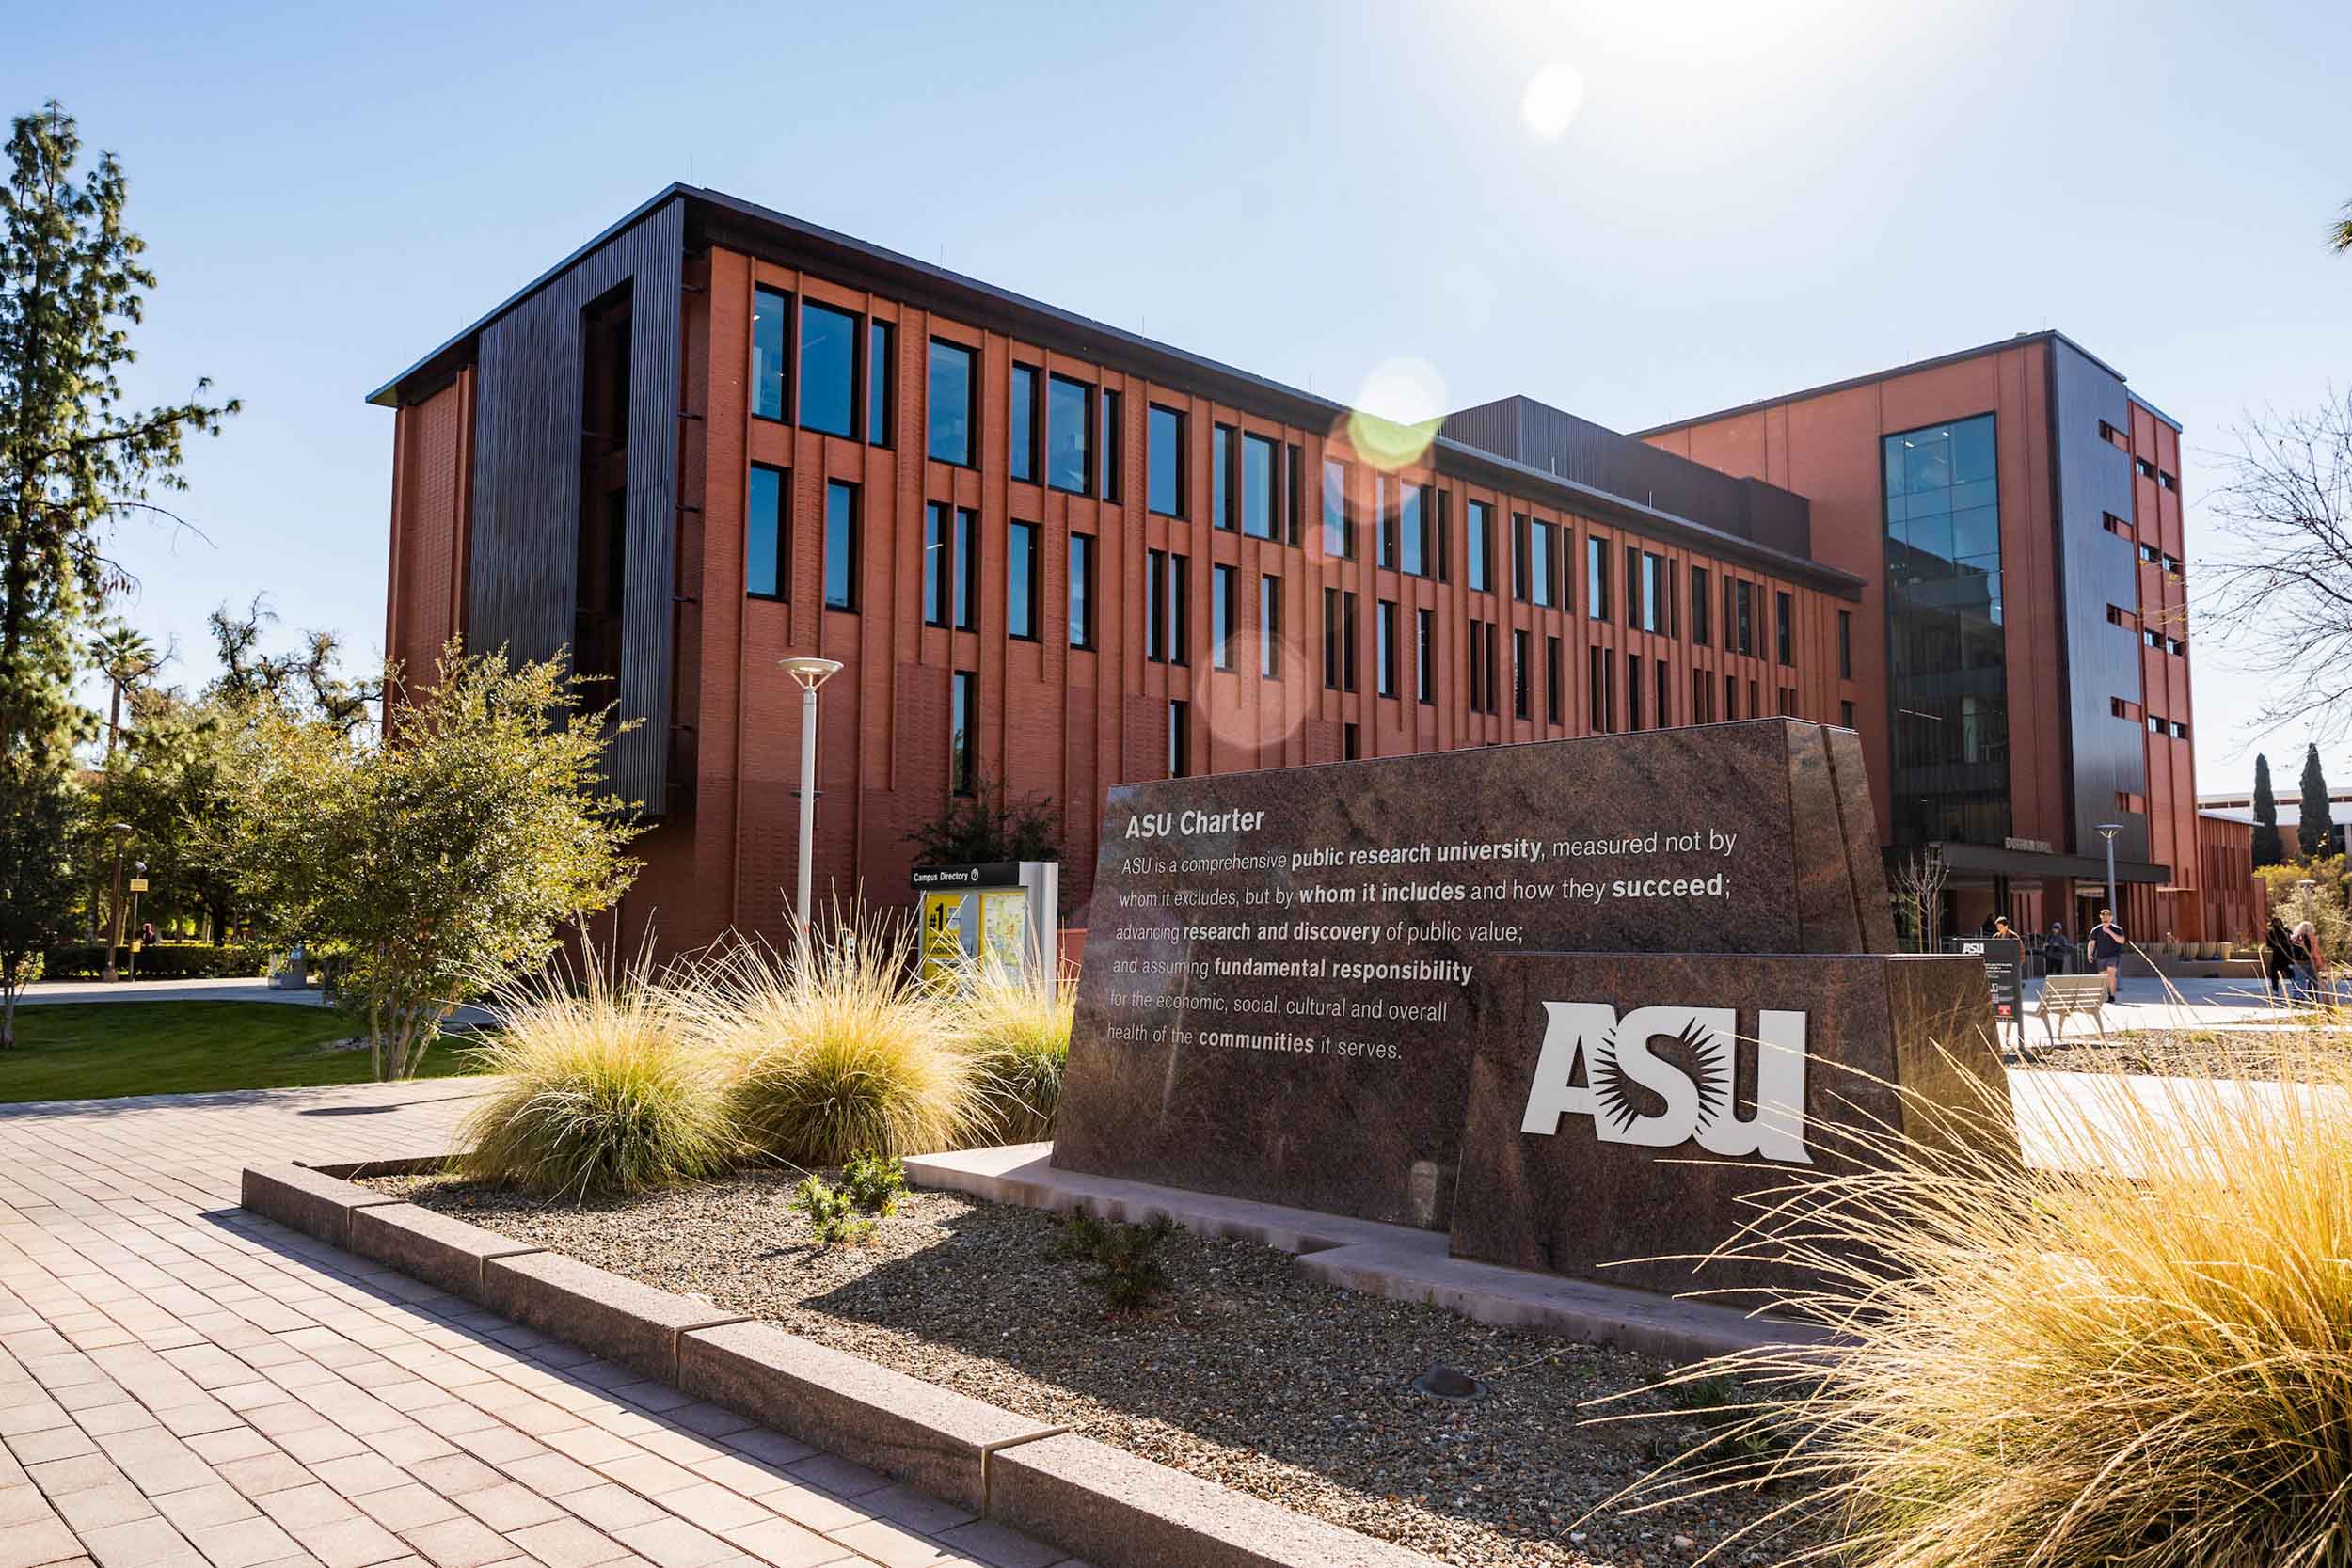 Image of the ASU Tempe campus with the ASU charter monument in the foreground